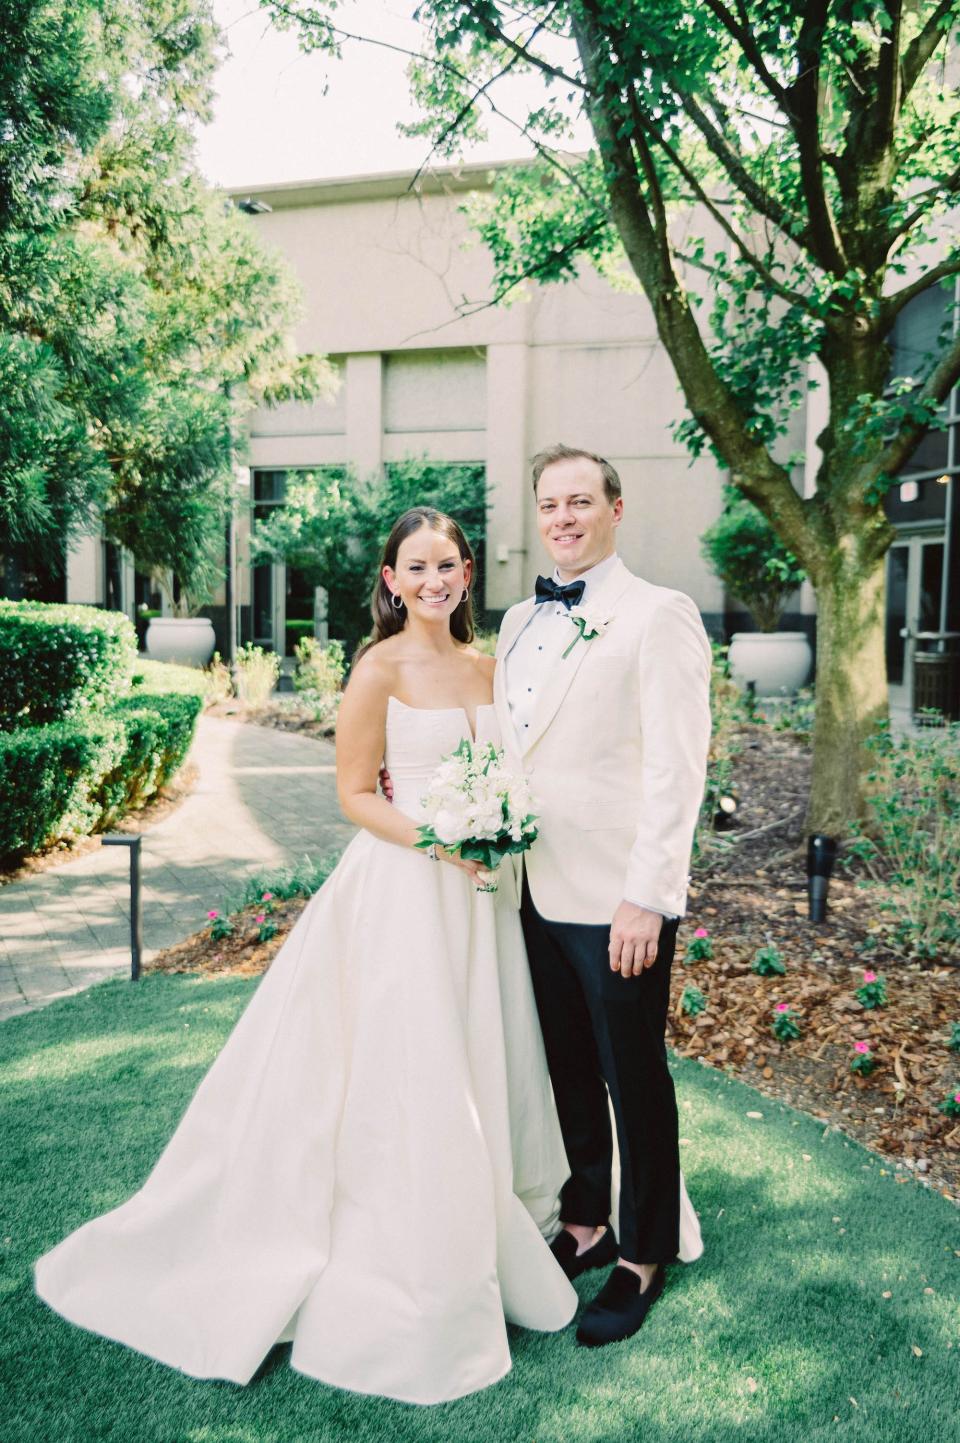 A bride and groom smile for a photo on a lawn.